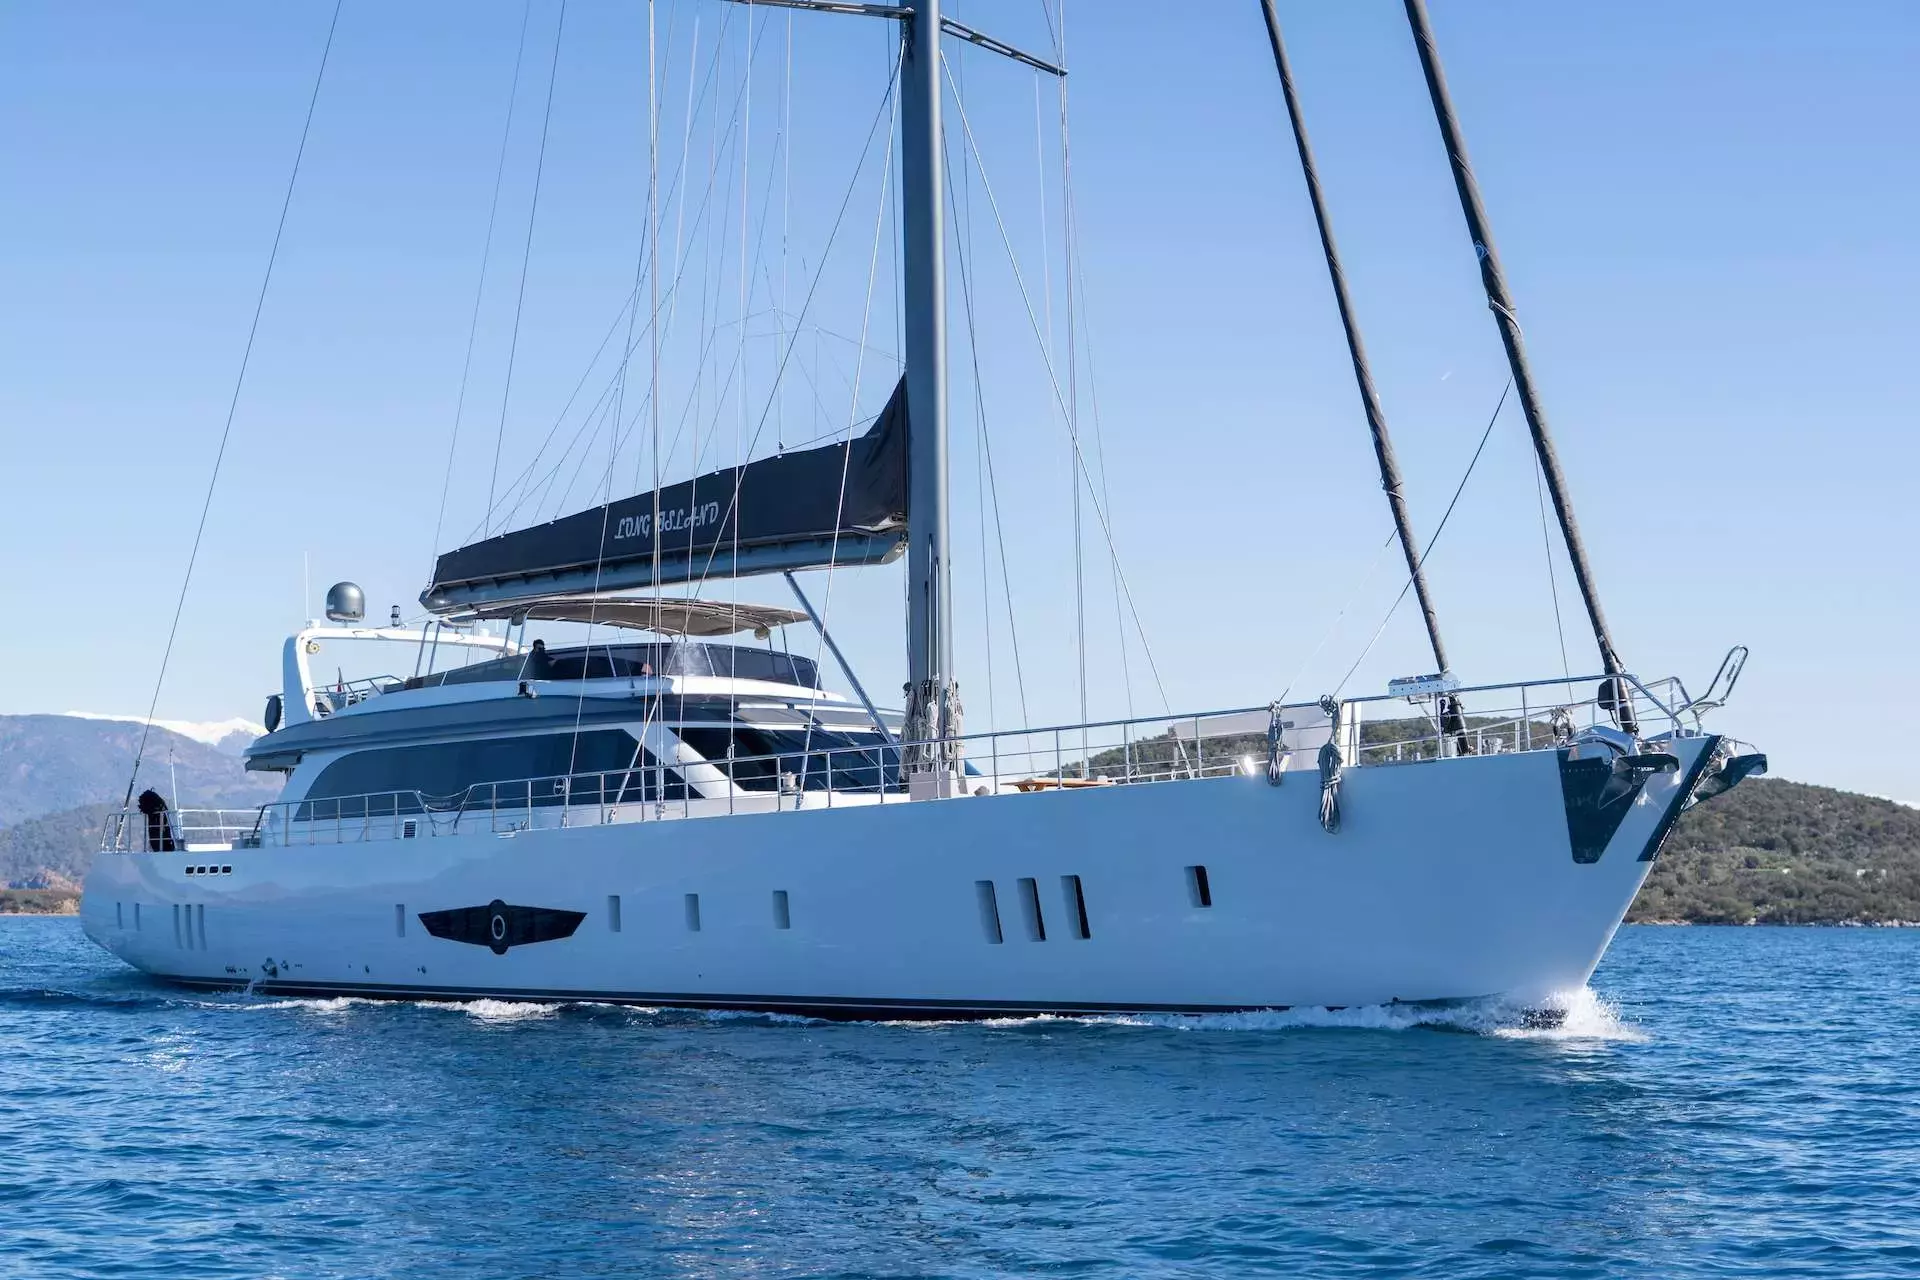 Long Island by Fethiye Shipyard - Top rates for a Rental of a private Motor Sailer in Turkey